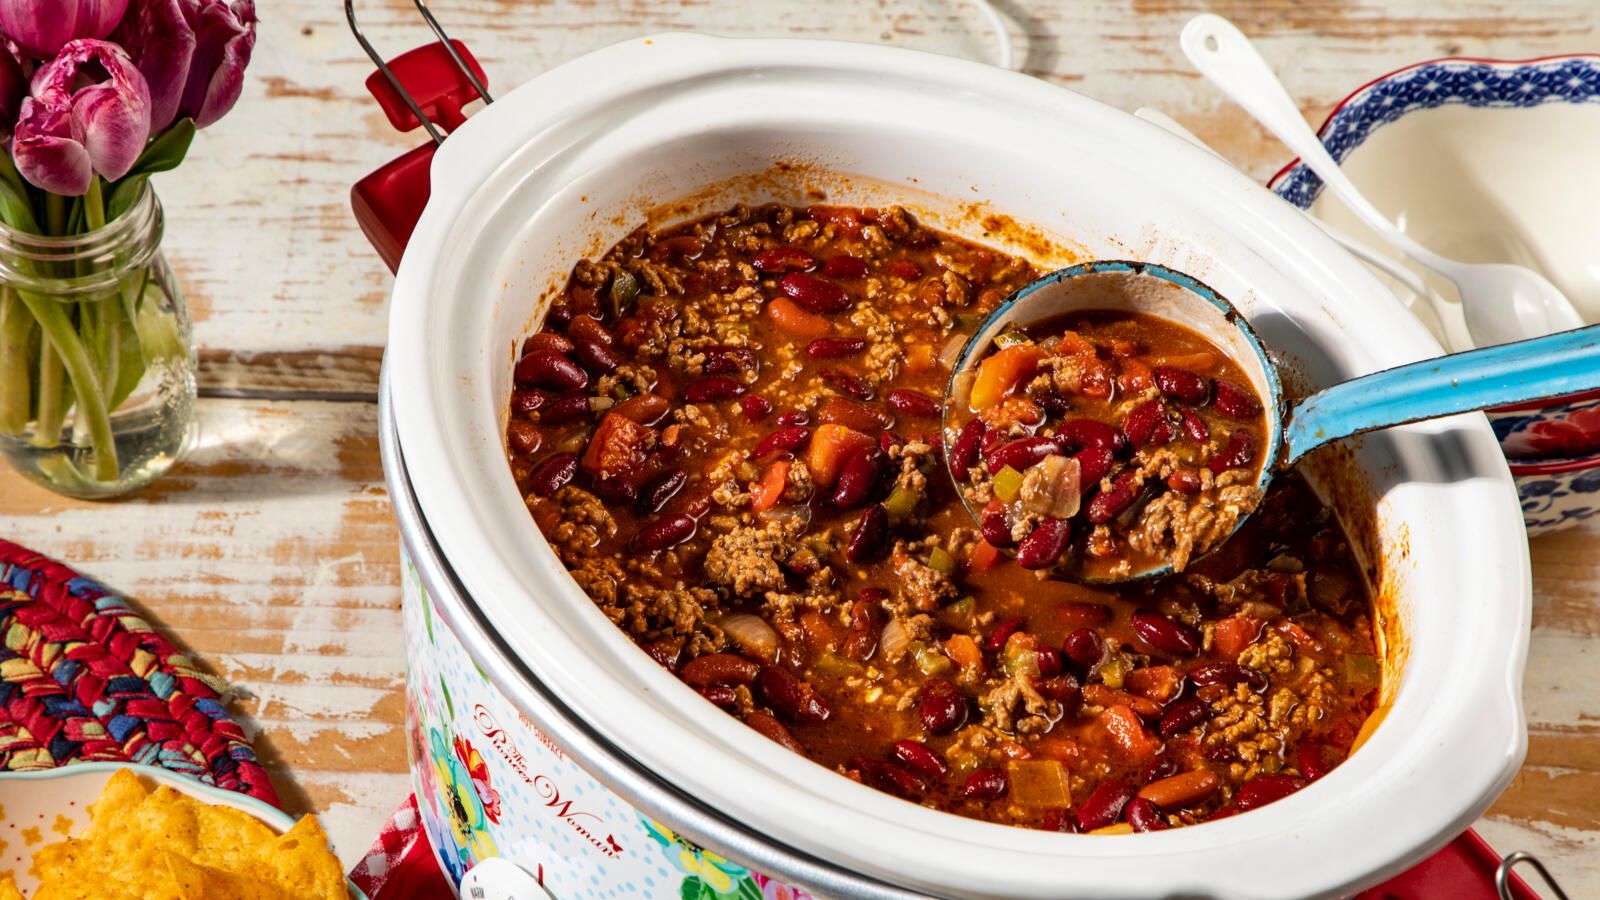 https://hips.hearstapps.com/hmg-prod/images/slow-cooker-chili-recipe-1643902383.jpg?crop=1xw:0.8434864104967198xh;center,top